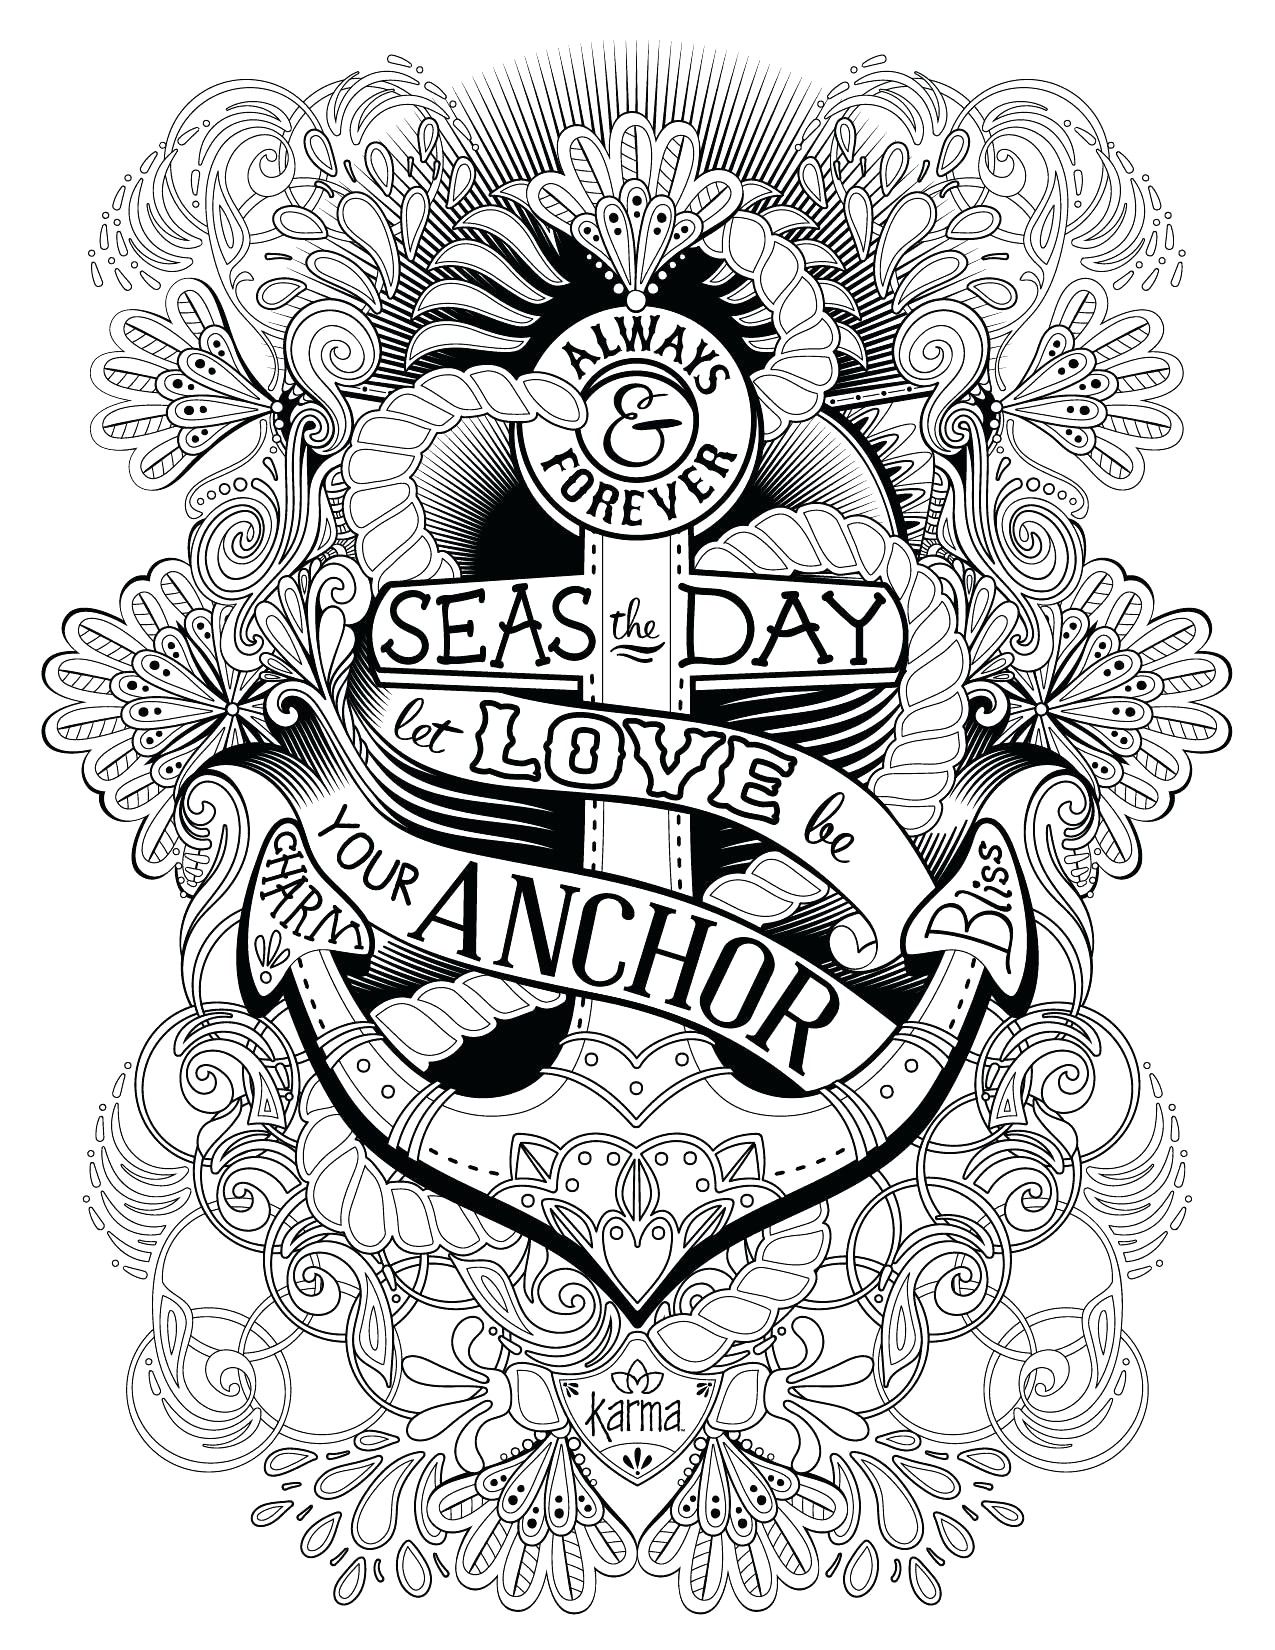 Coloring Pages : Cute Adult Coloring Pages New Hope Anchor ...